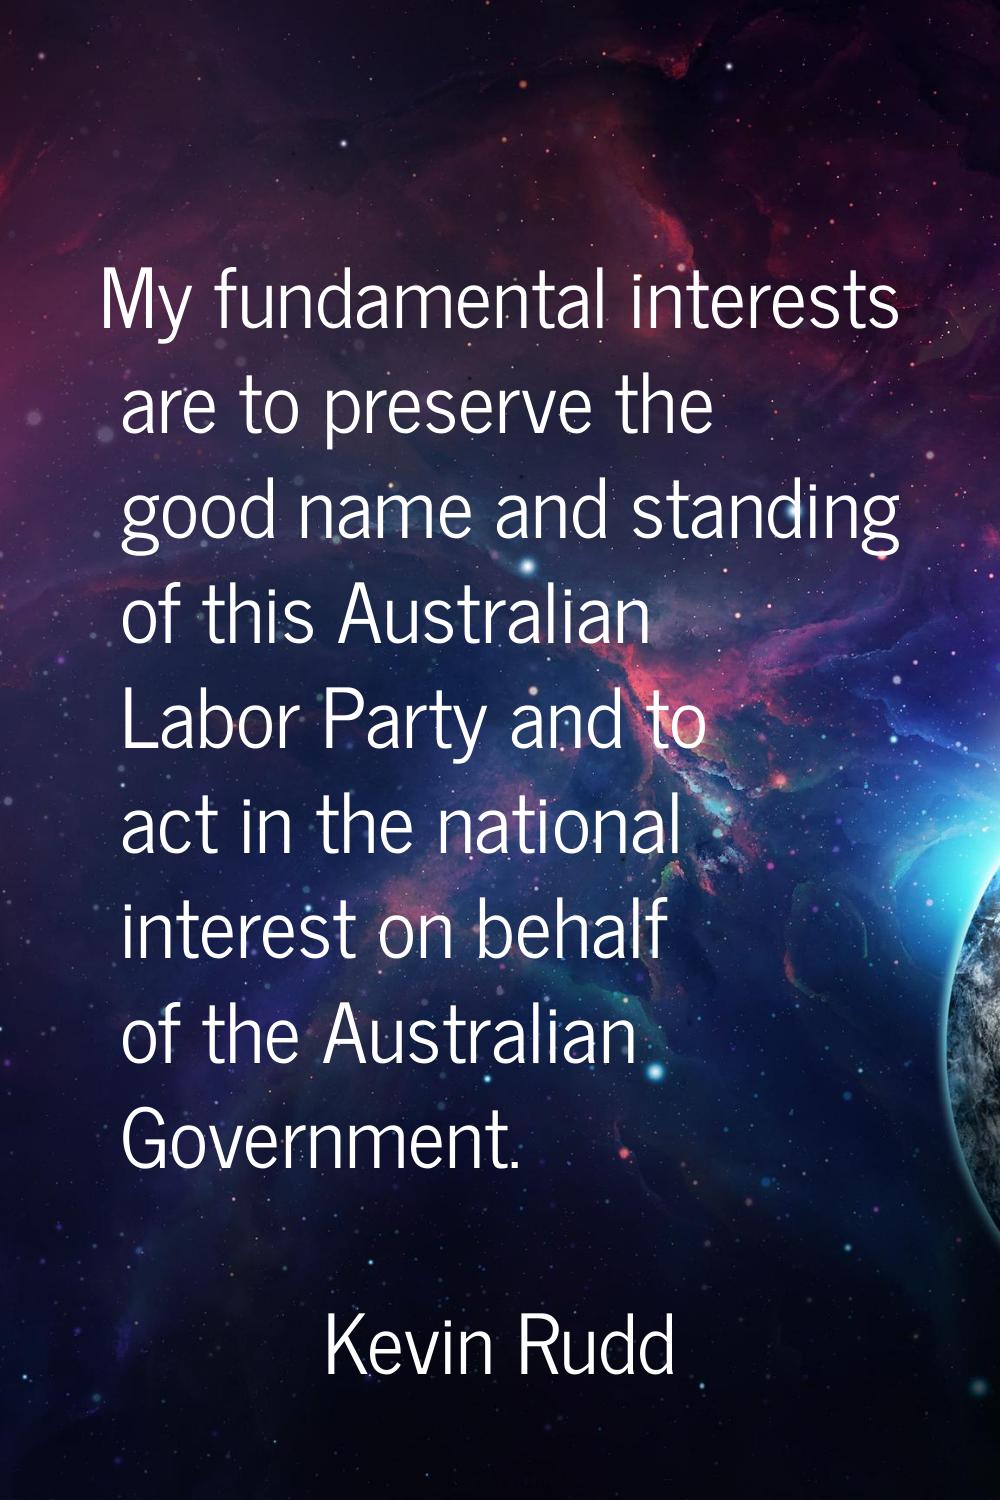 My fundamental interests are to preserve the good name and standing of this Australian Labor Party 